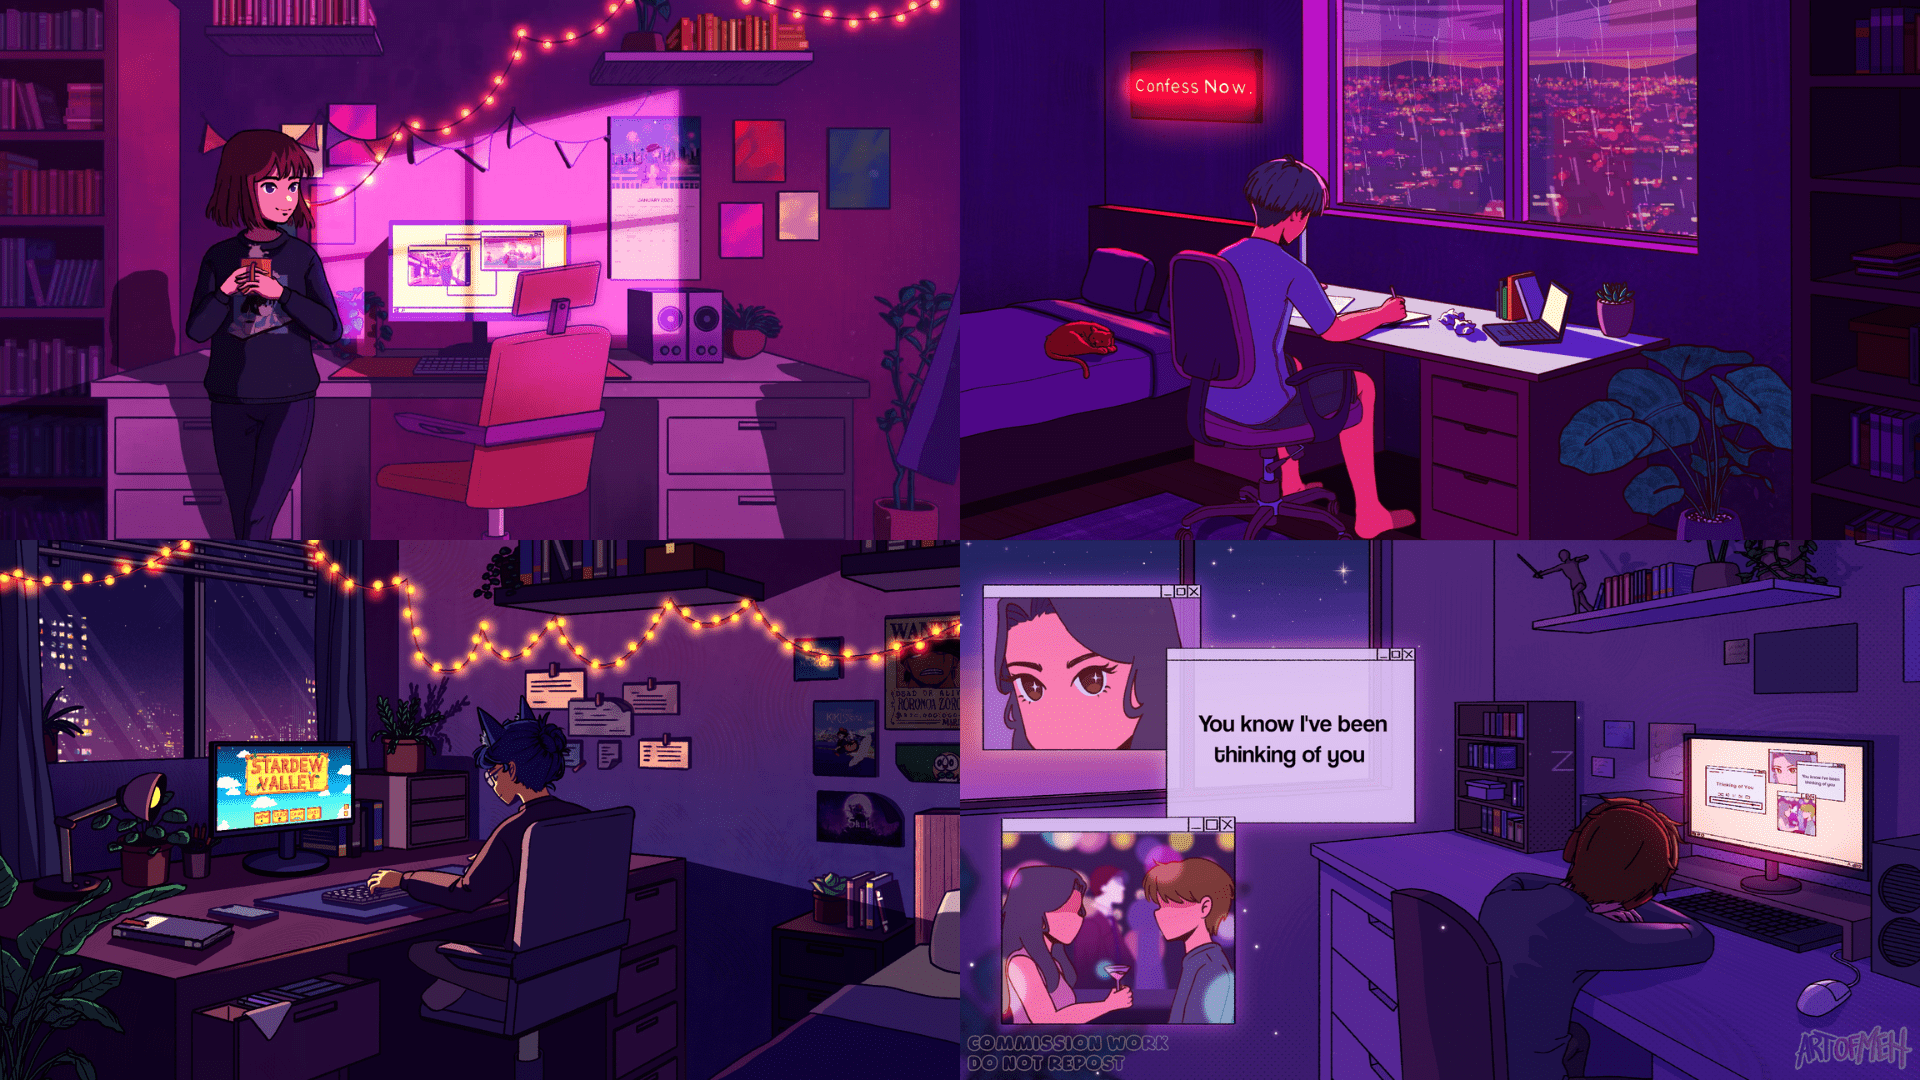 FOR HIRE Lo Fi Artist For Hire! If You Are Looking For A Lofi Looping Animation For Your YT Channel Or Twitch Banner, Hit Me Up! (details Below)